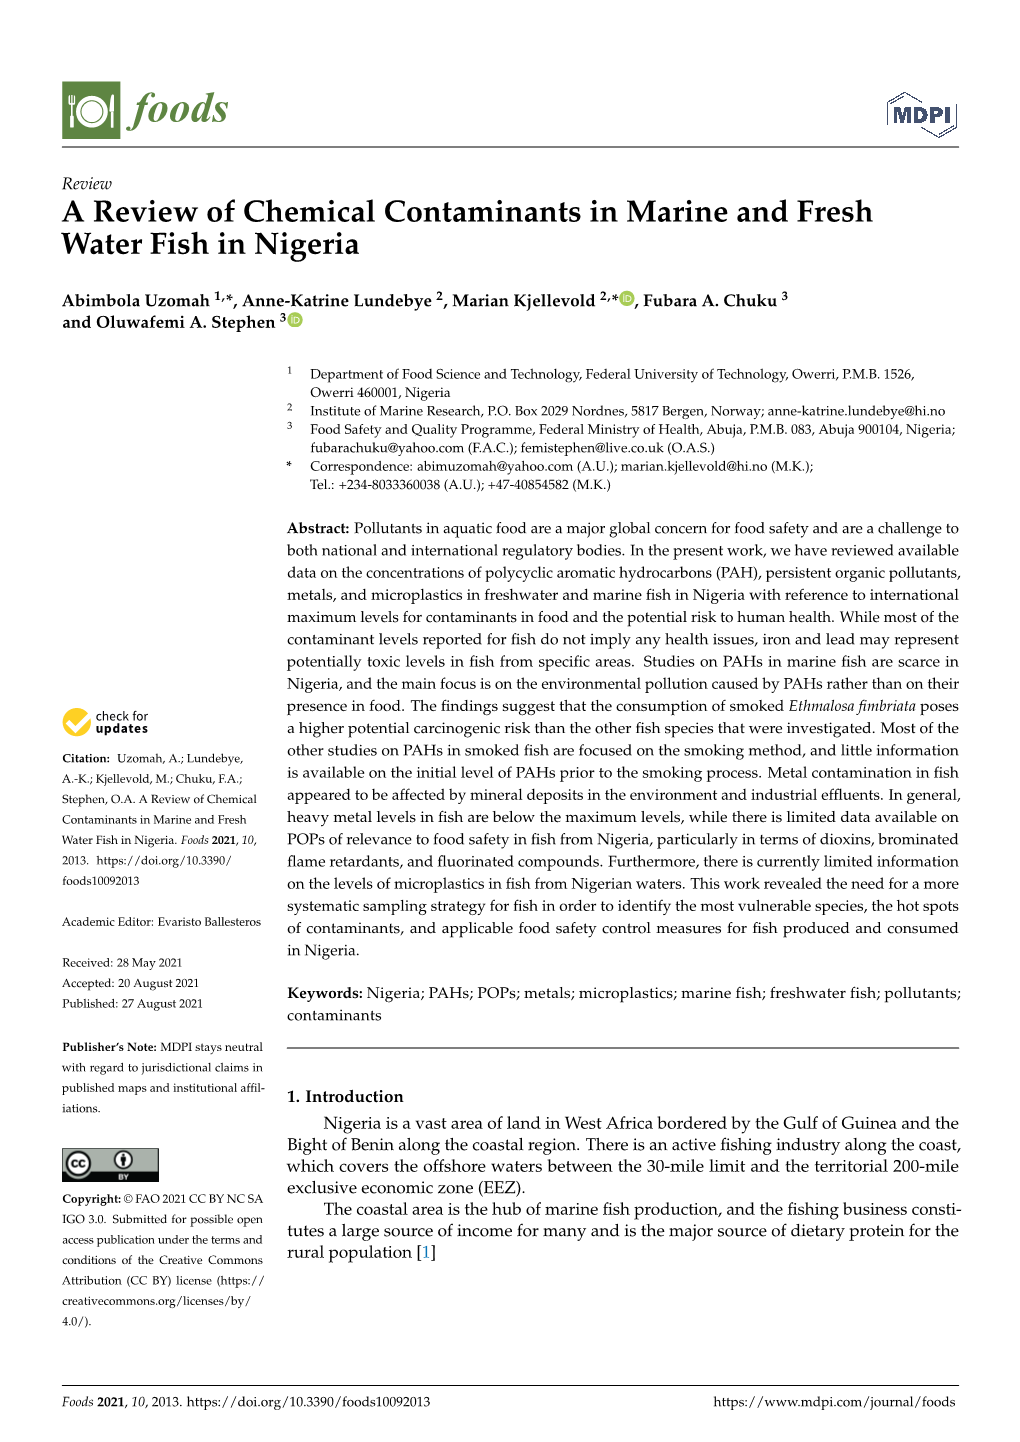 A Review of Chemical Contaminants in Marine and Fresh Water Fish in Nigeria